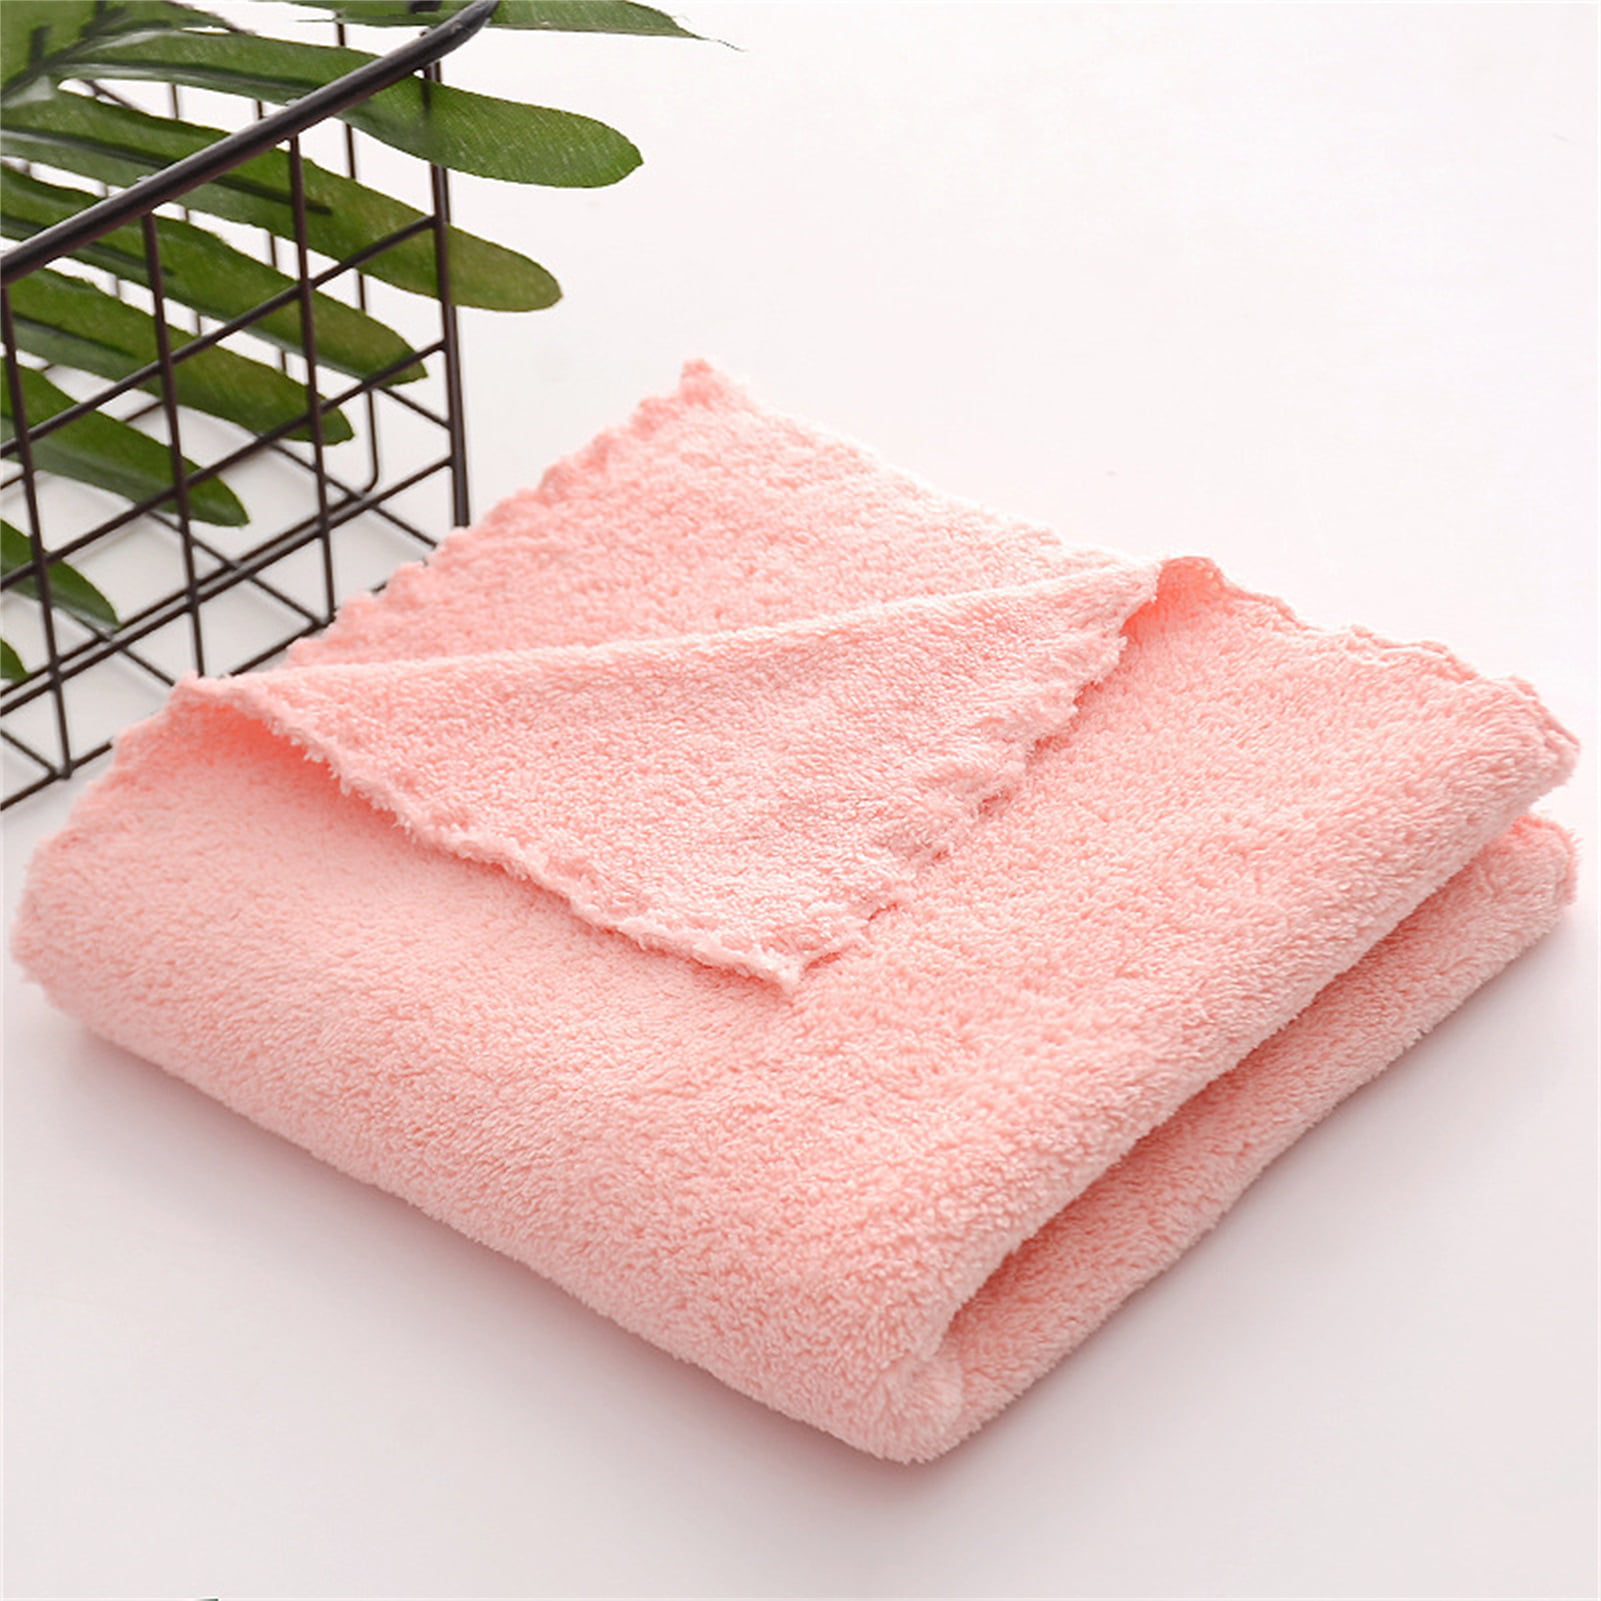 Child Soft Towel Baby Water Absorbing Towel for Bathing Shower 25*50cm US STOCK 